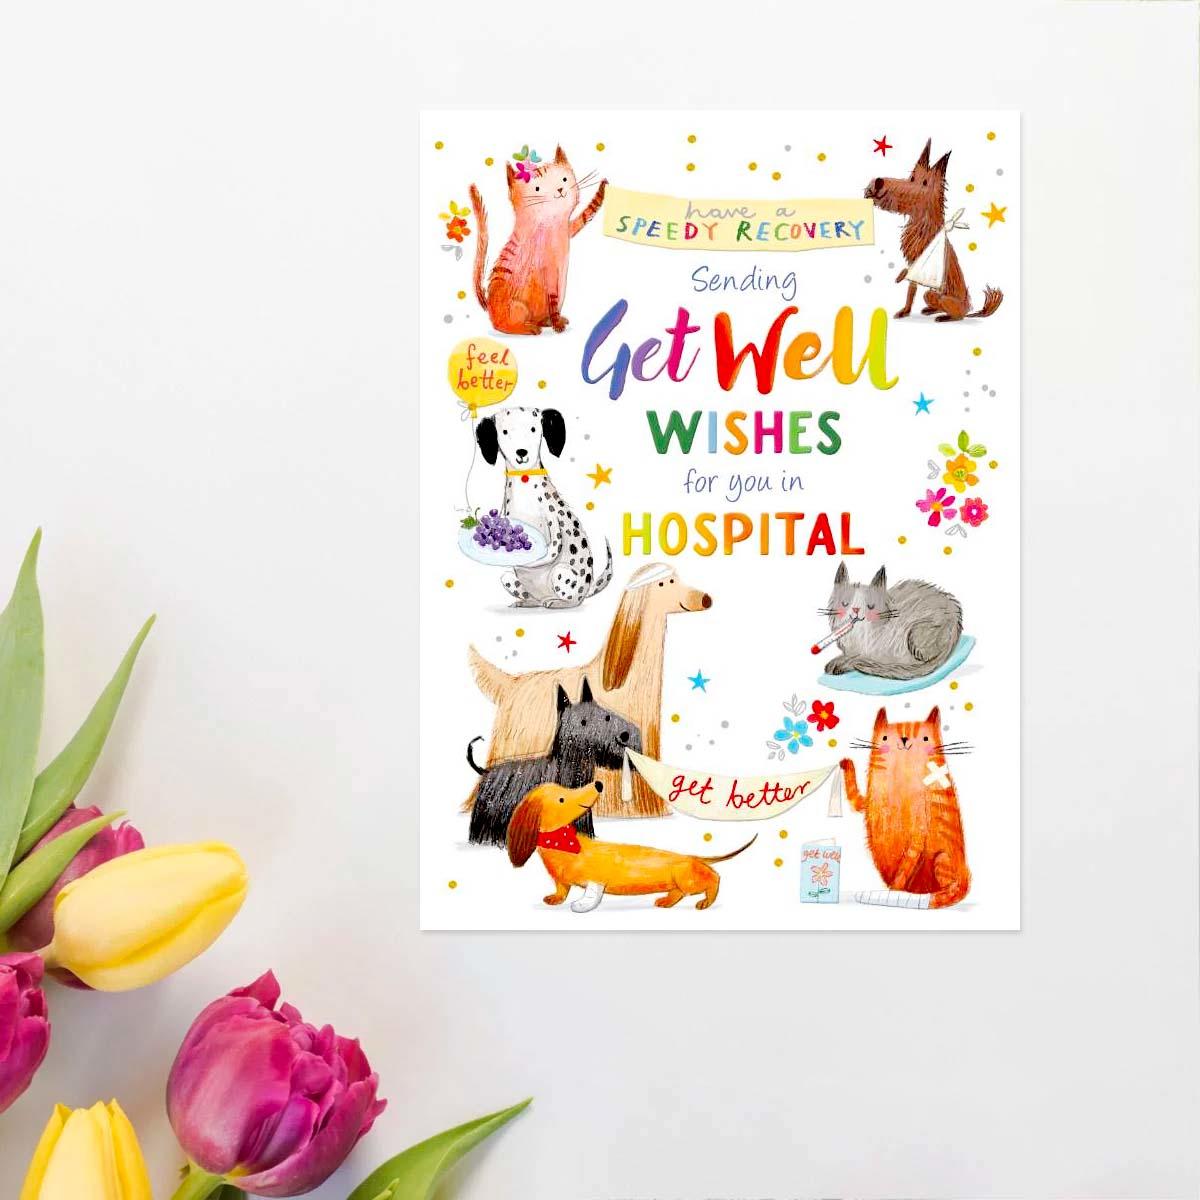 Get Well Wishes For You In Hospital Card front Image